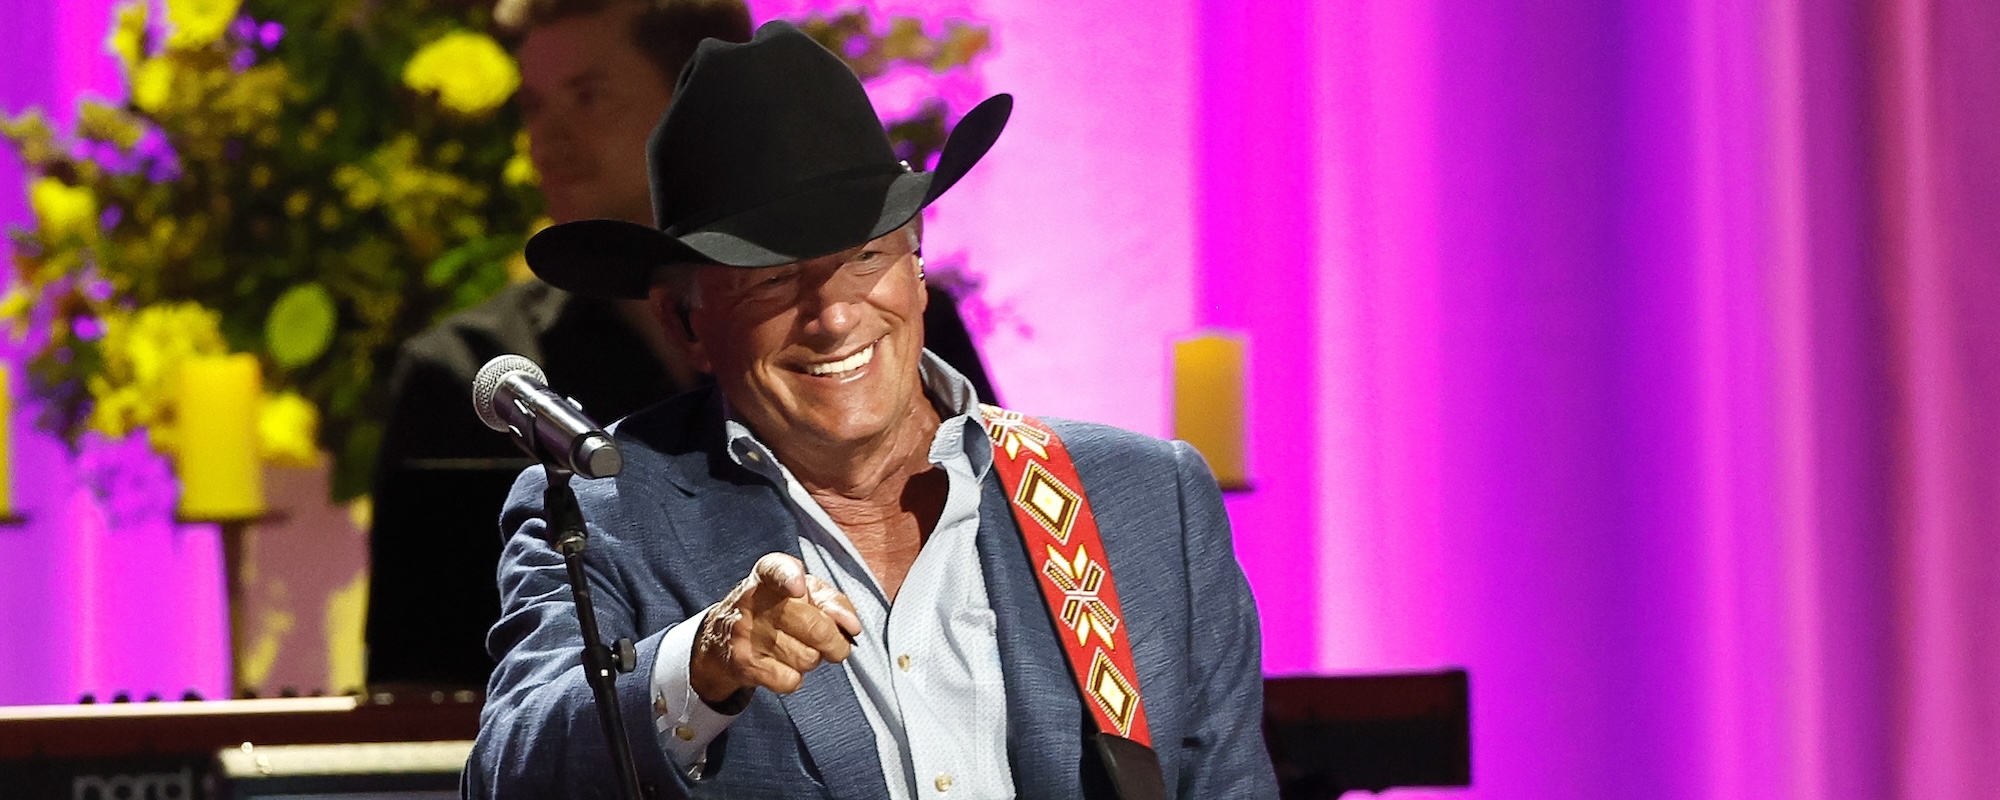 The Lone Star State Exes Behind George Strait’s 1987 Hit “All My Ex’s Live in Texas”